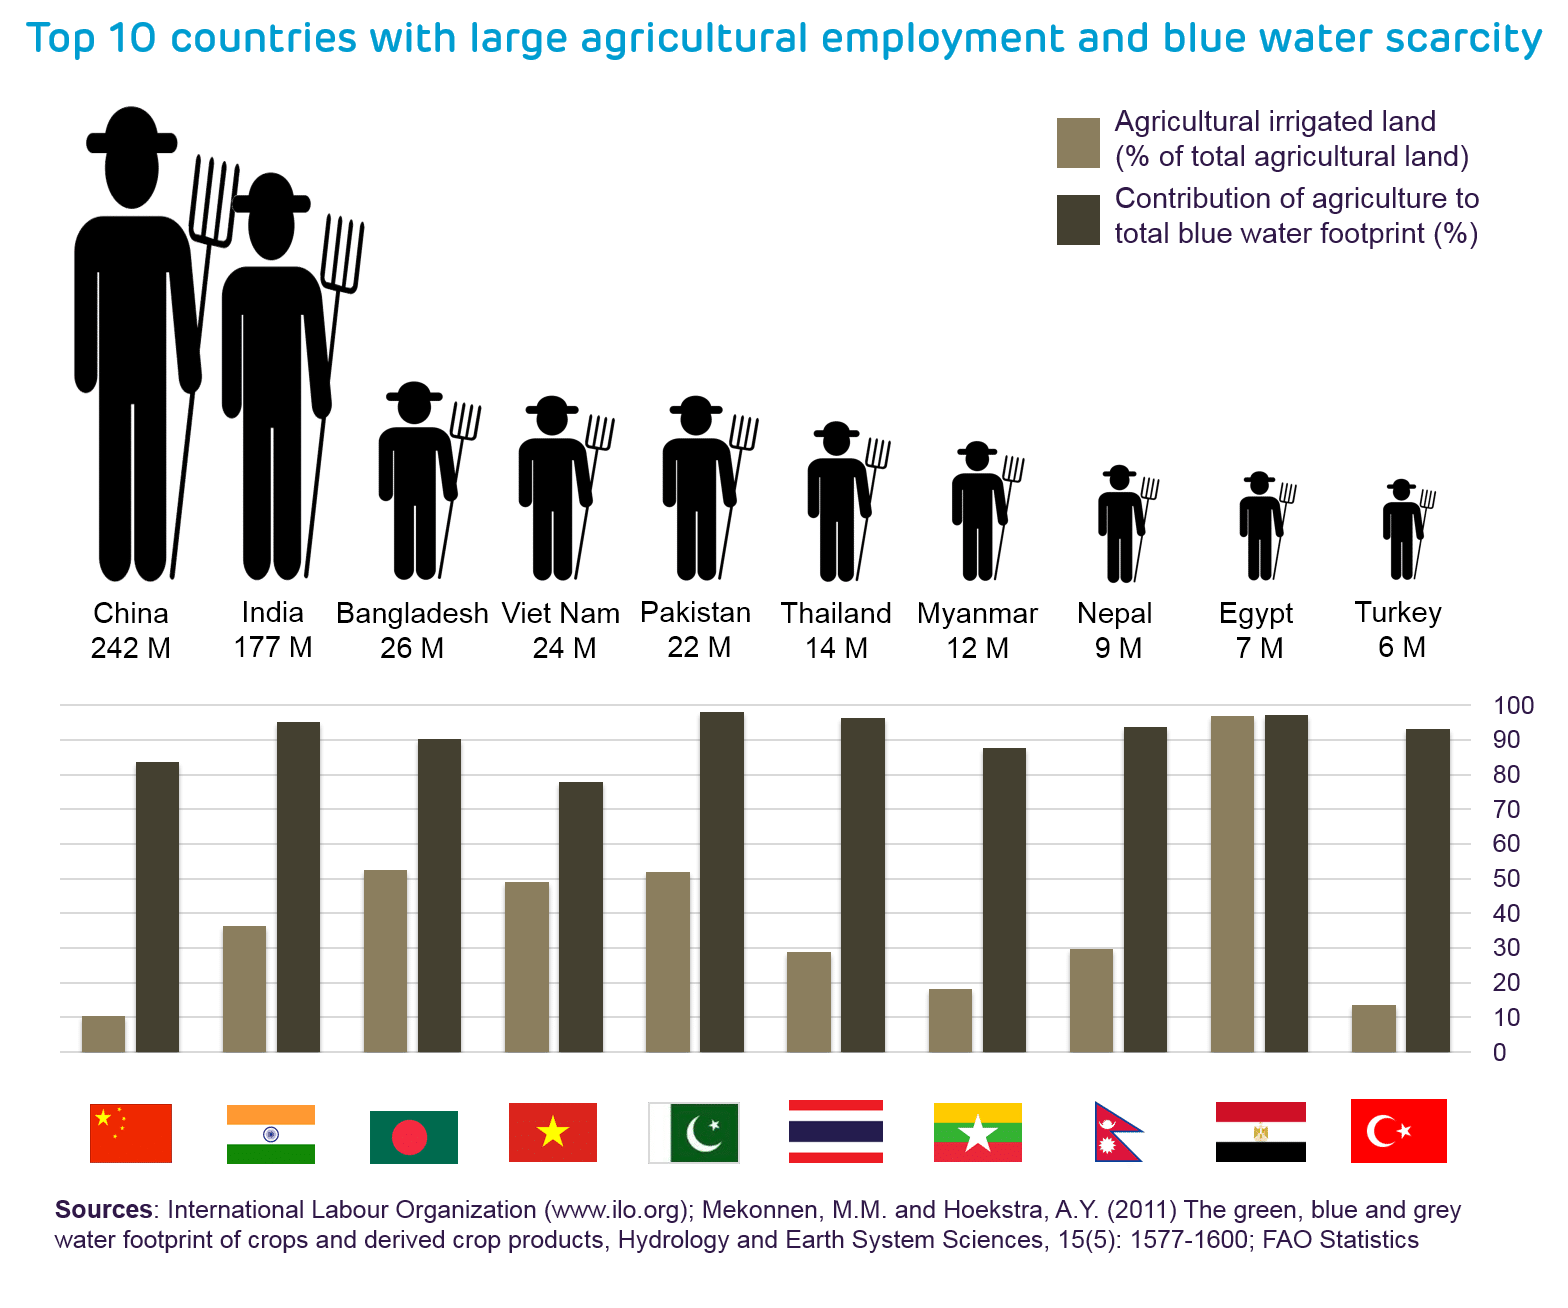 2_Top_10_countries_with_large_agri_employment